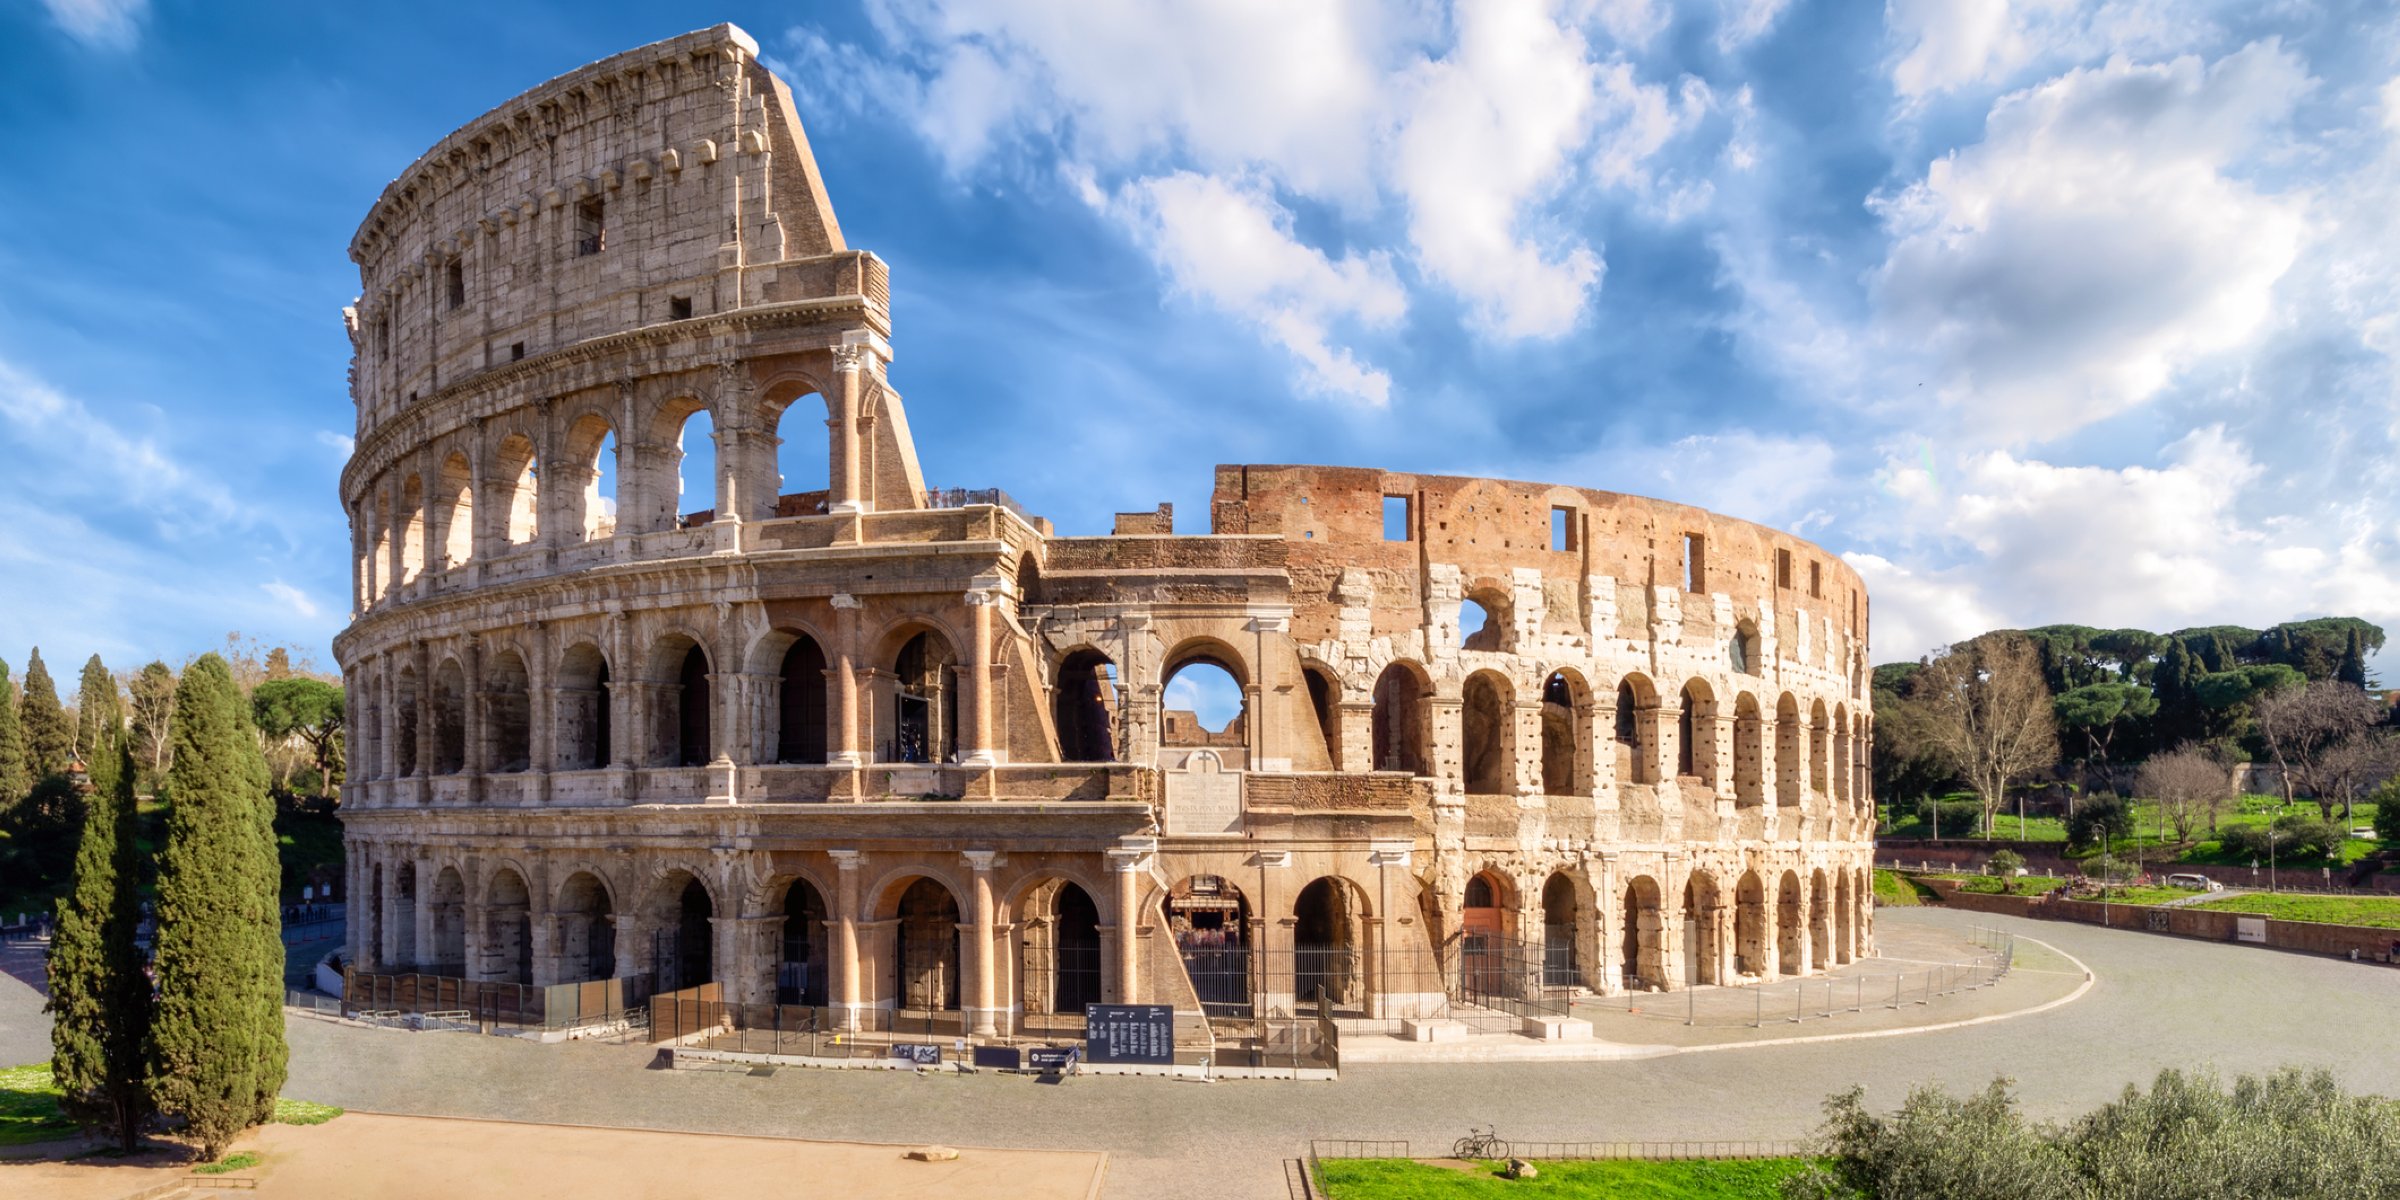 Italy's landmark Colosseum reopens | Daily Sabah